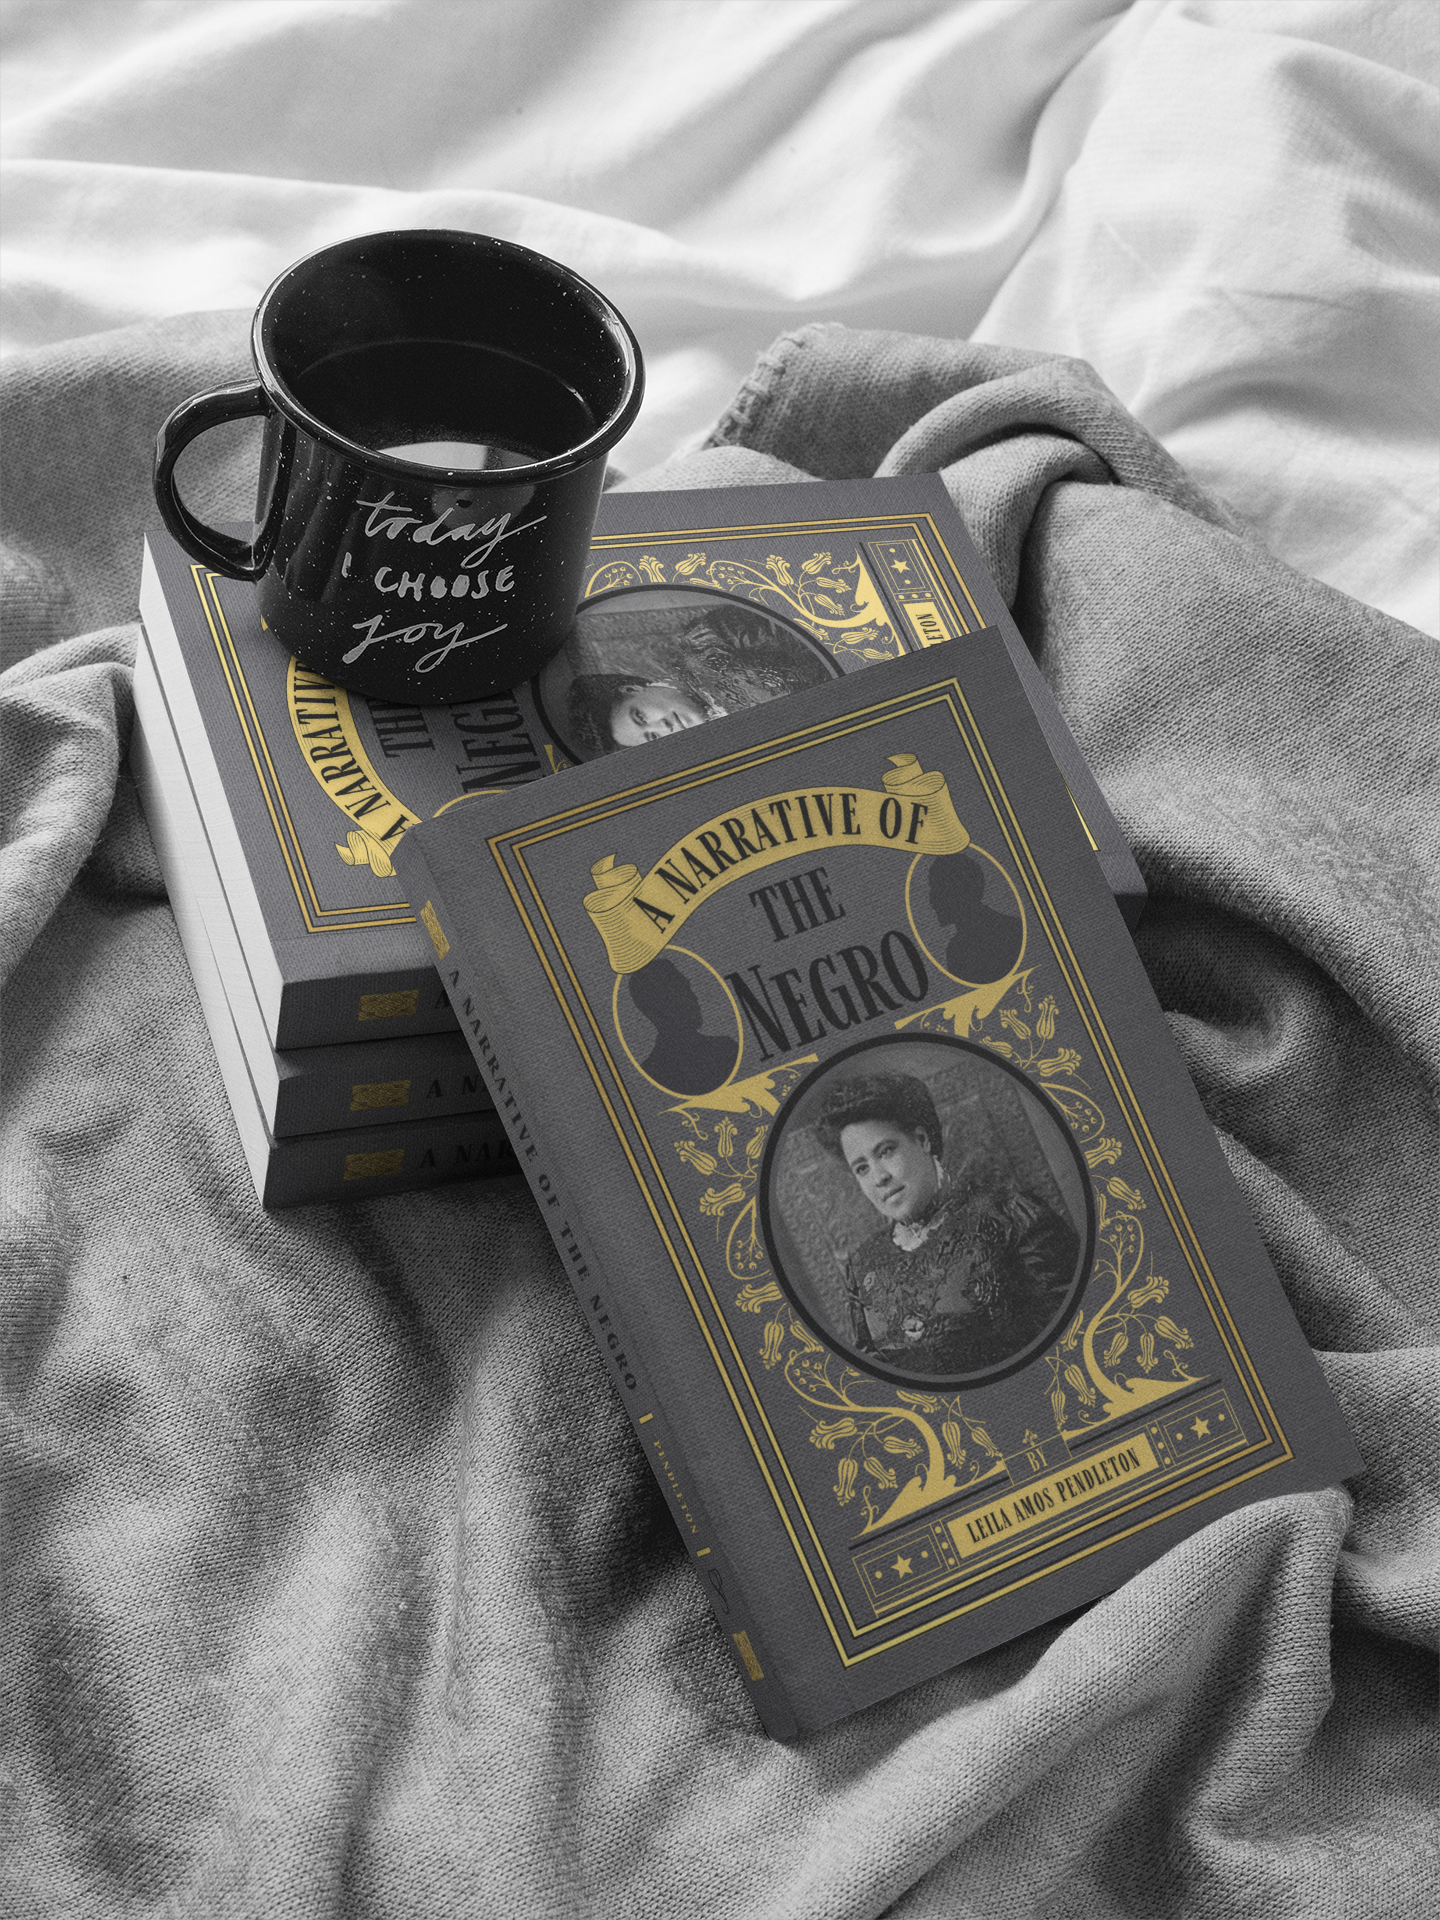 A stack of the paperbacks of A Narrative of the Negro, a yellow and grey book, stacked on a rumpled grey blanket with a dark coffee mug that says "today I choose joy". One paperback is propped up by the stack so that the cover is fully facing the viewer.